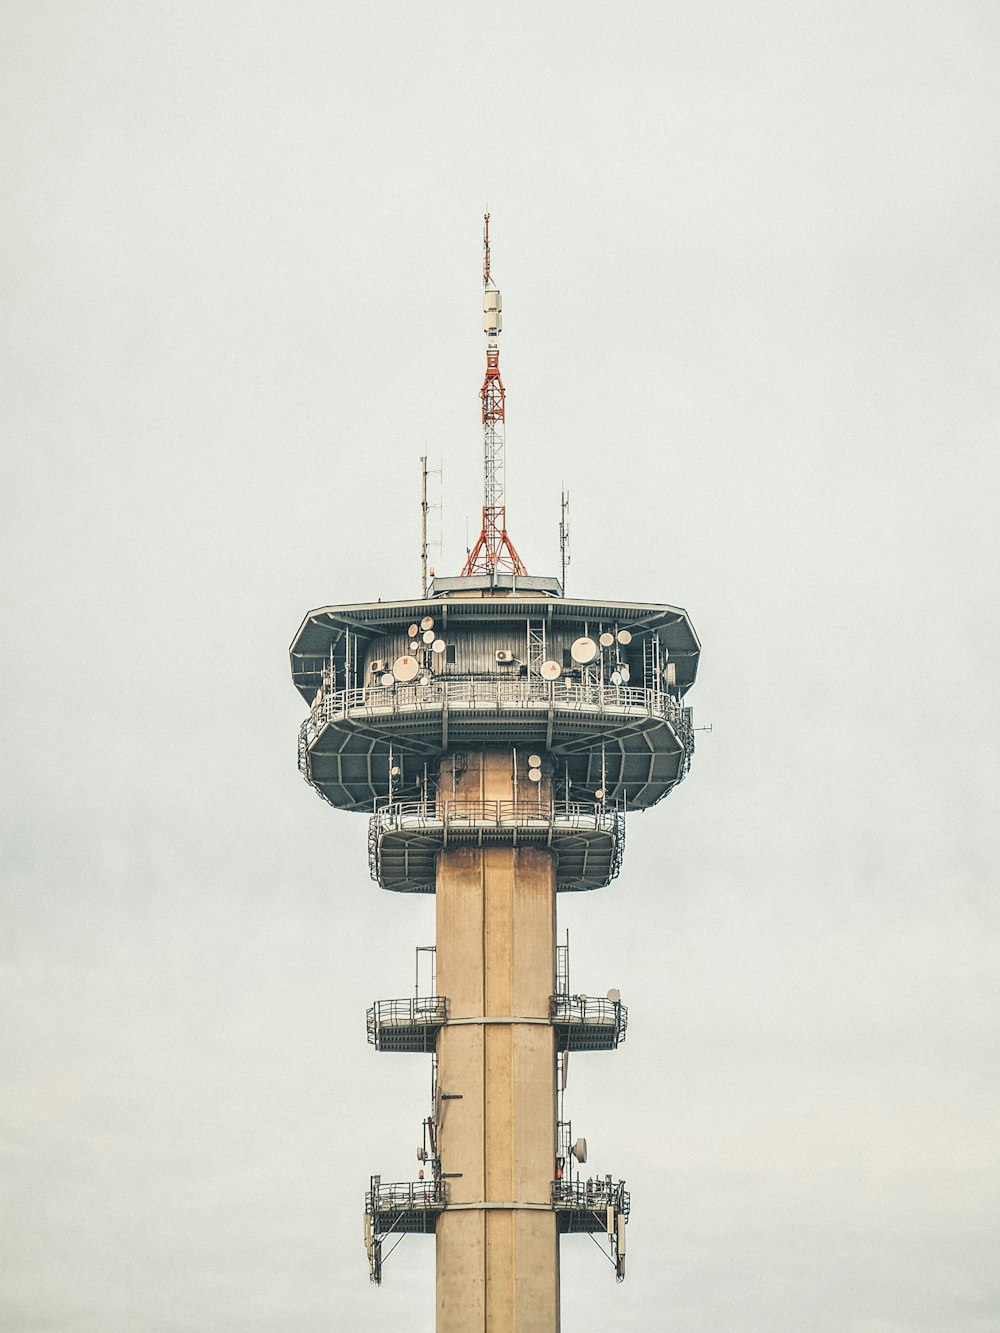 a tall tower with a radio antenna on top of it